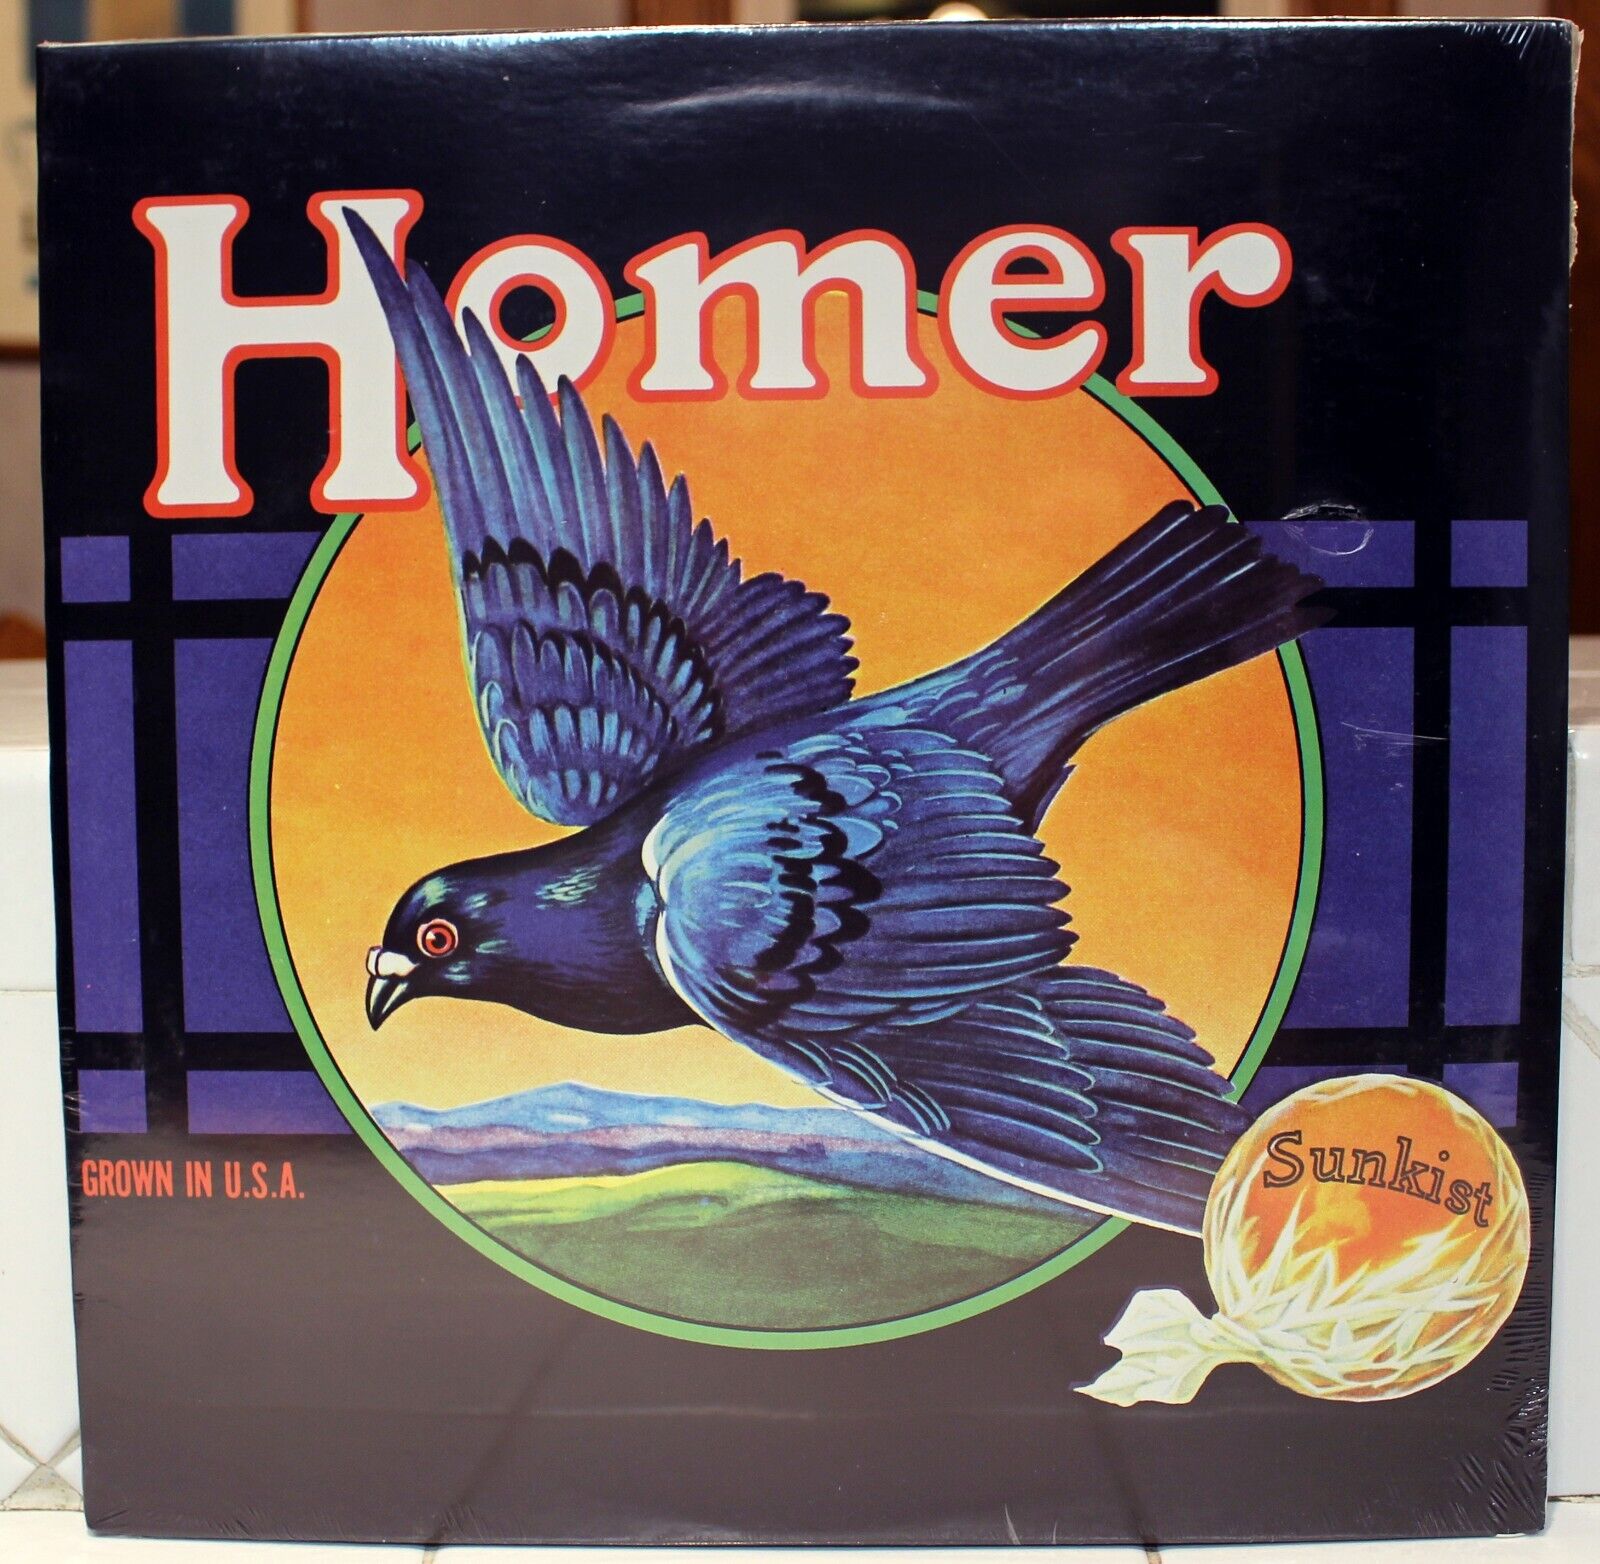 Very Rare Rock / Psych LP - Homer - Grown In U.S.A. - NEW SEALED